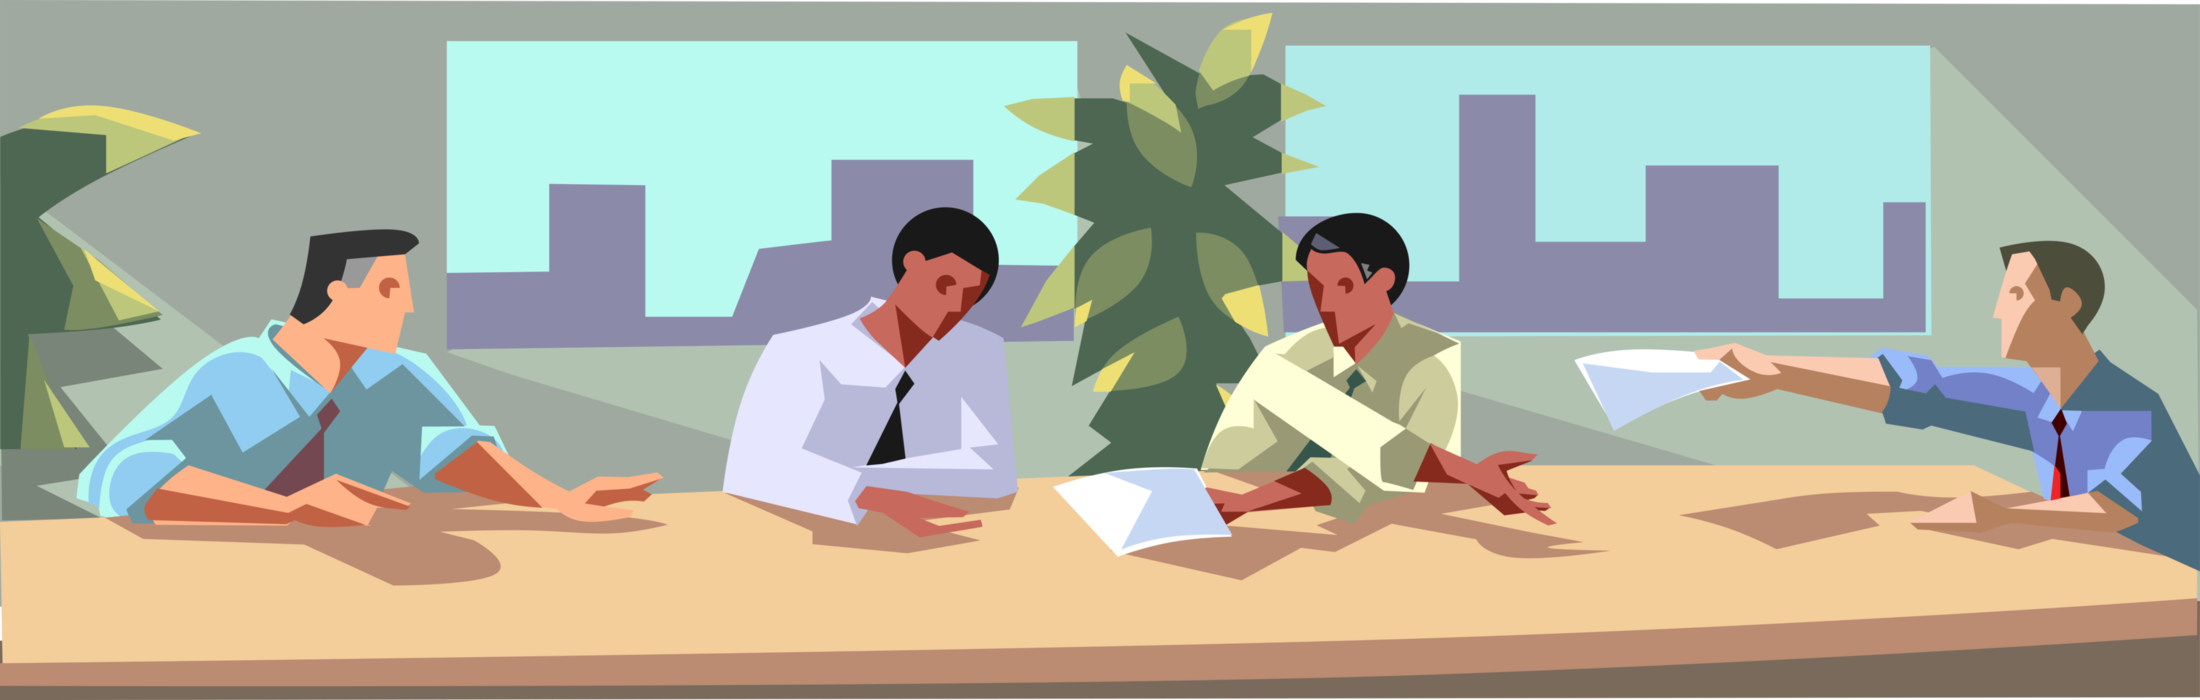 Vector Illustration of Boardroom Meeting Passing Documents for Review and Discussion